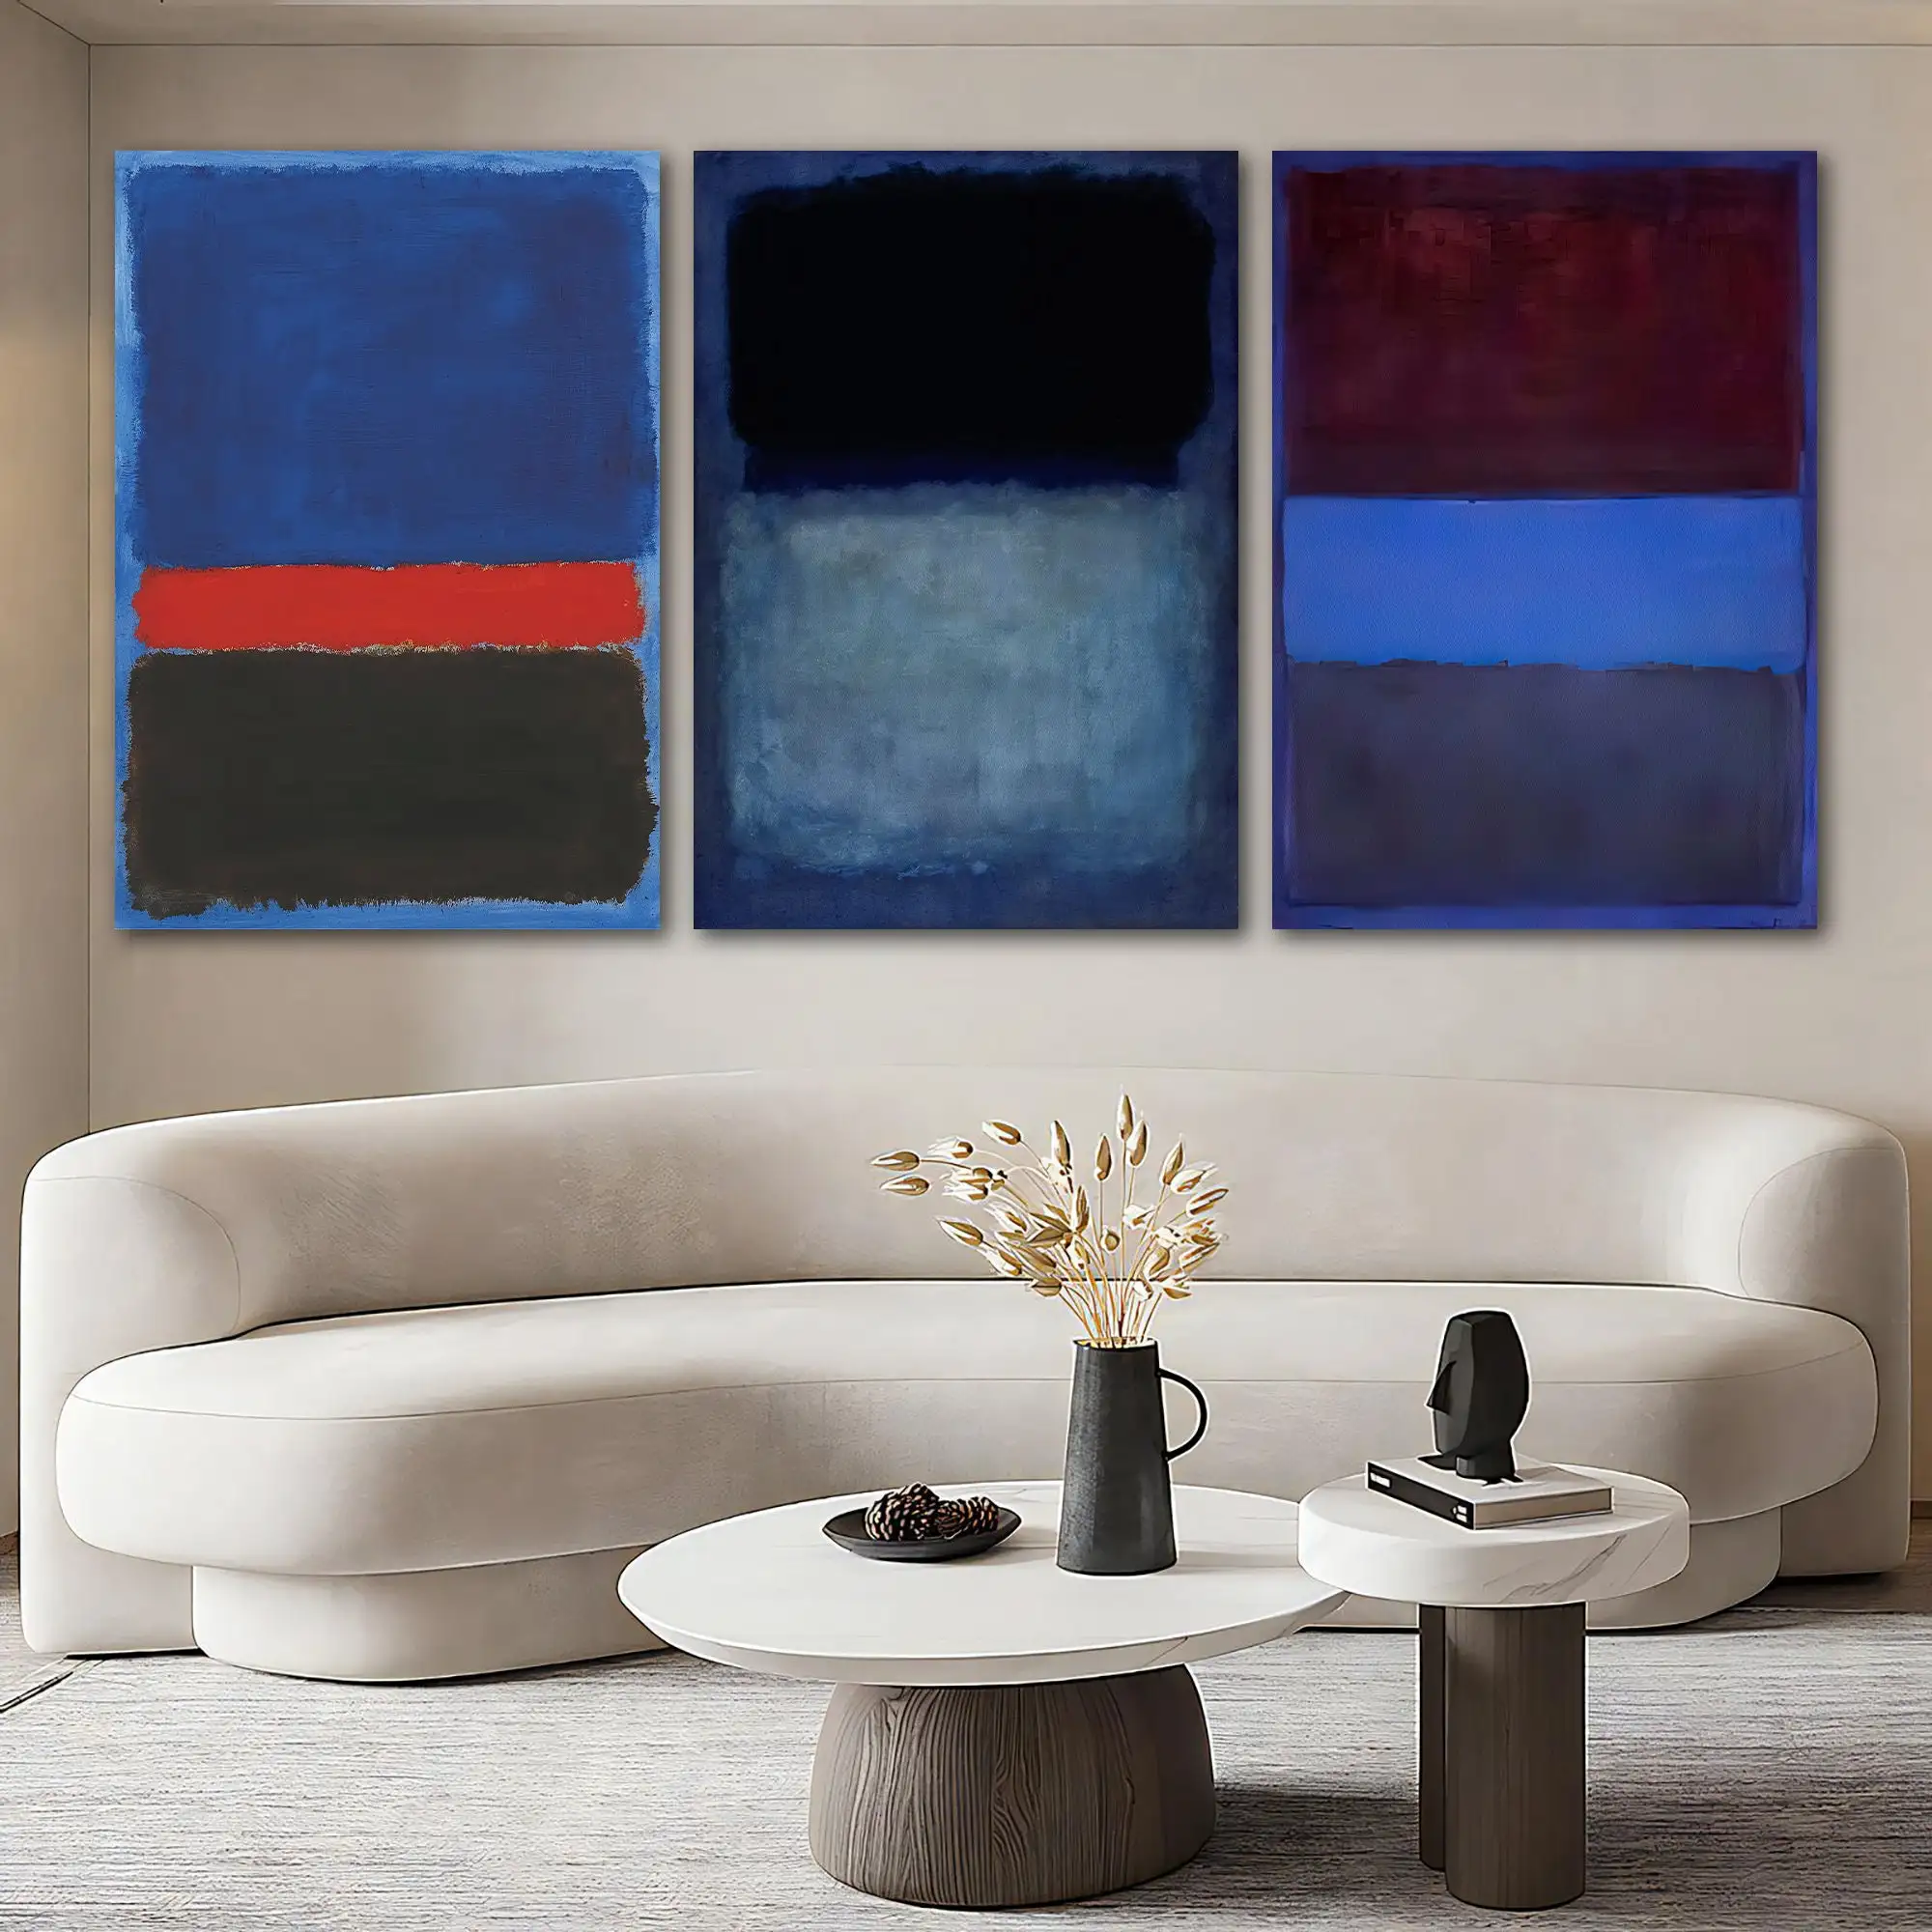 Mark Rothko Classical Abstract Art Posters Prints Canvas Wall Art Rothko Reproduction Picture for Living Room Cuadros Home Decor